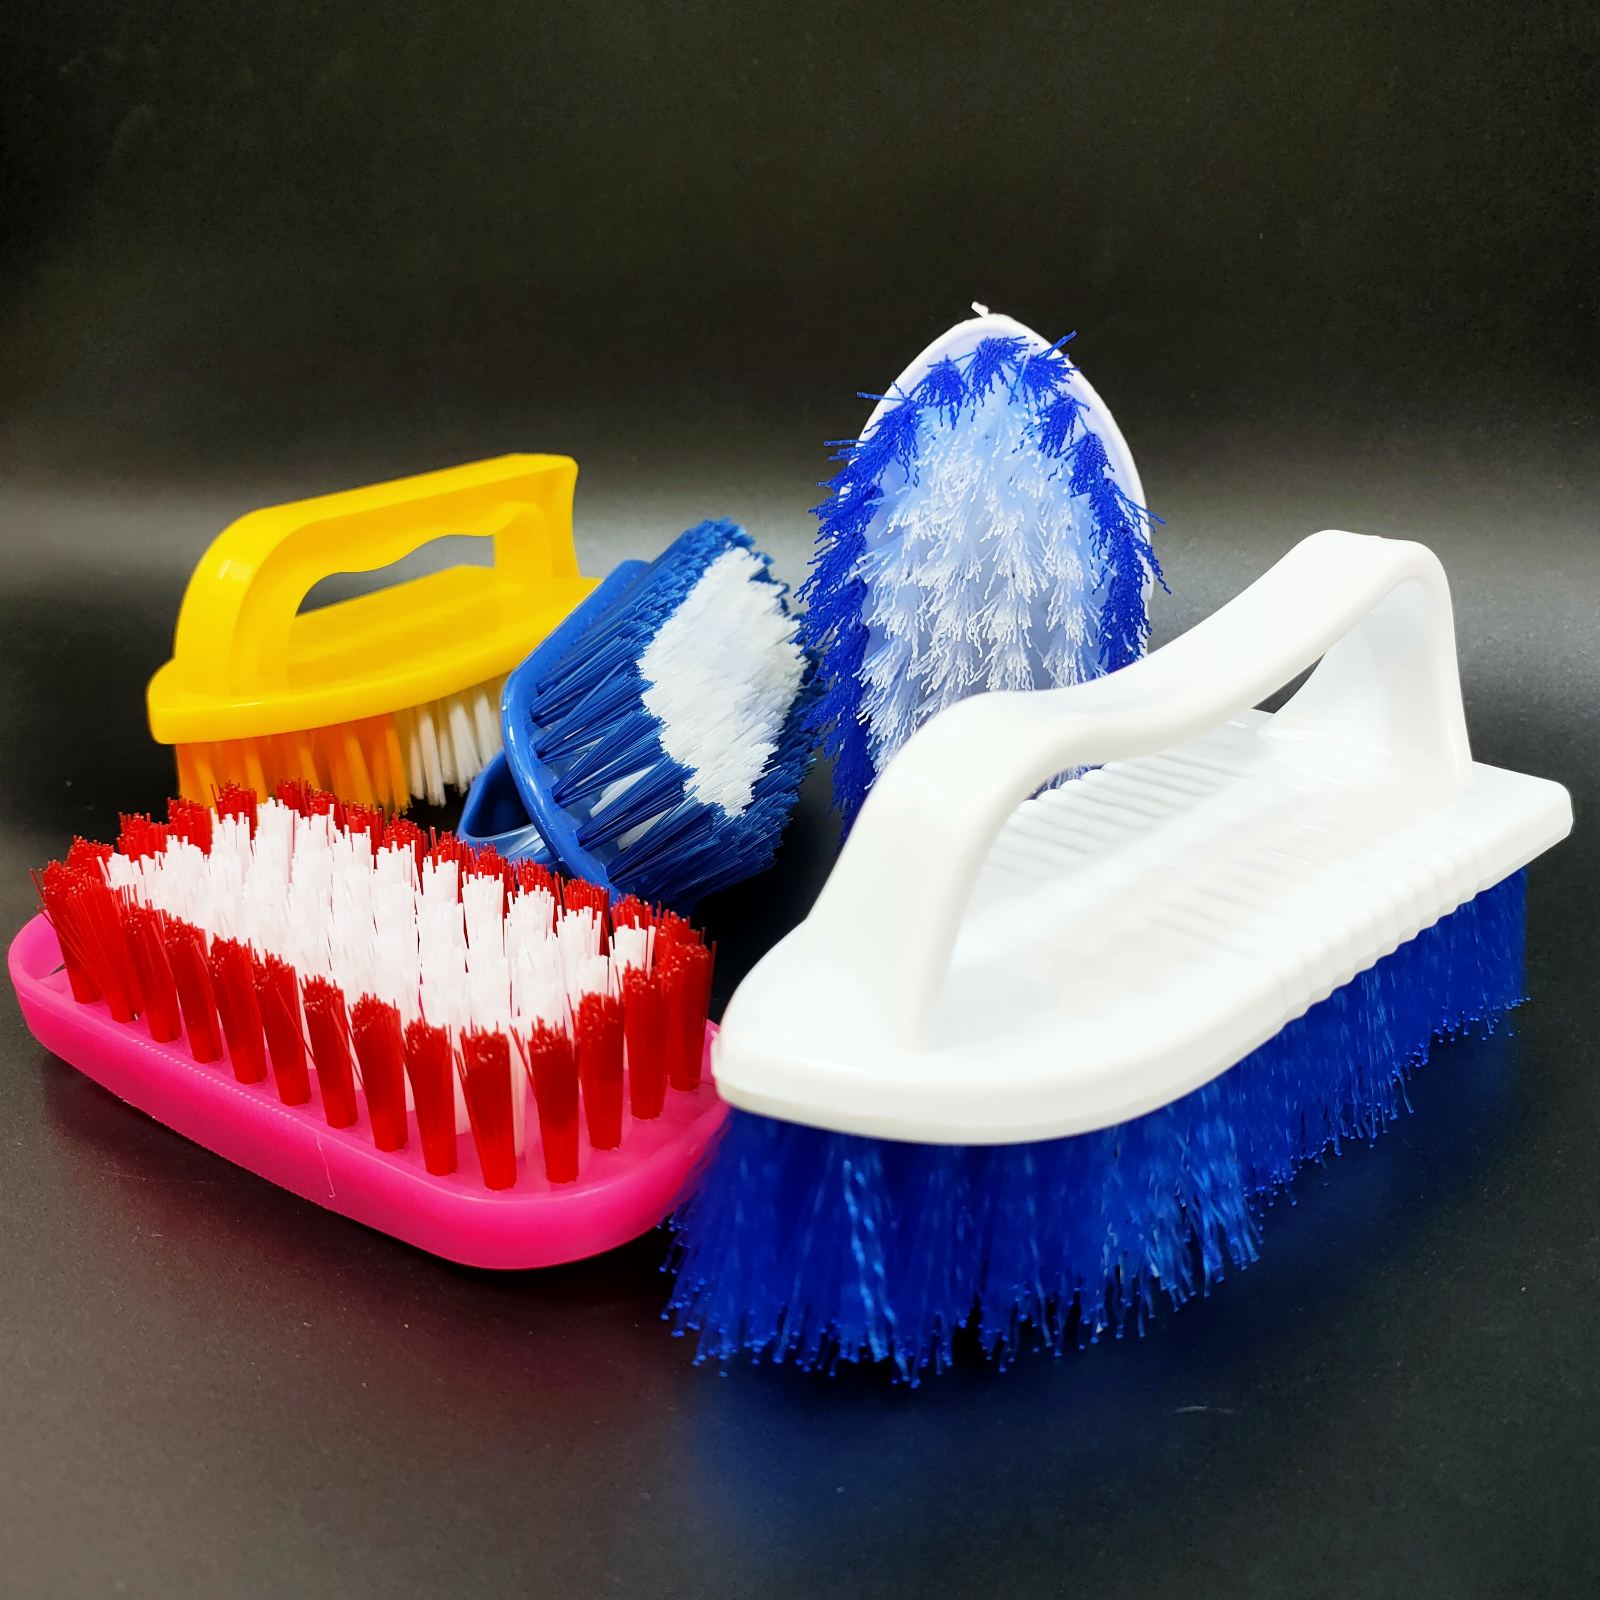 CLEANING BRUSH